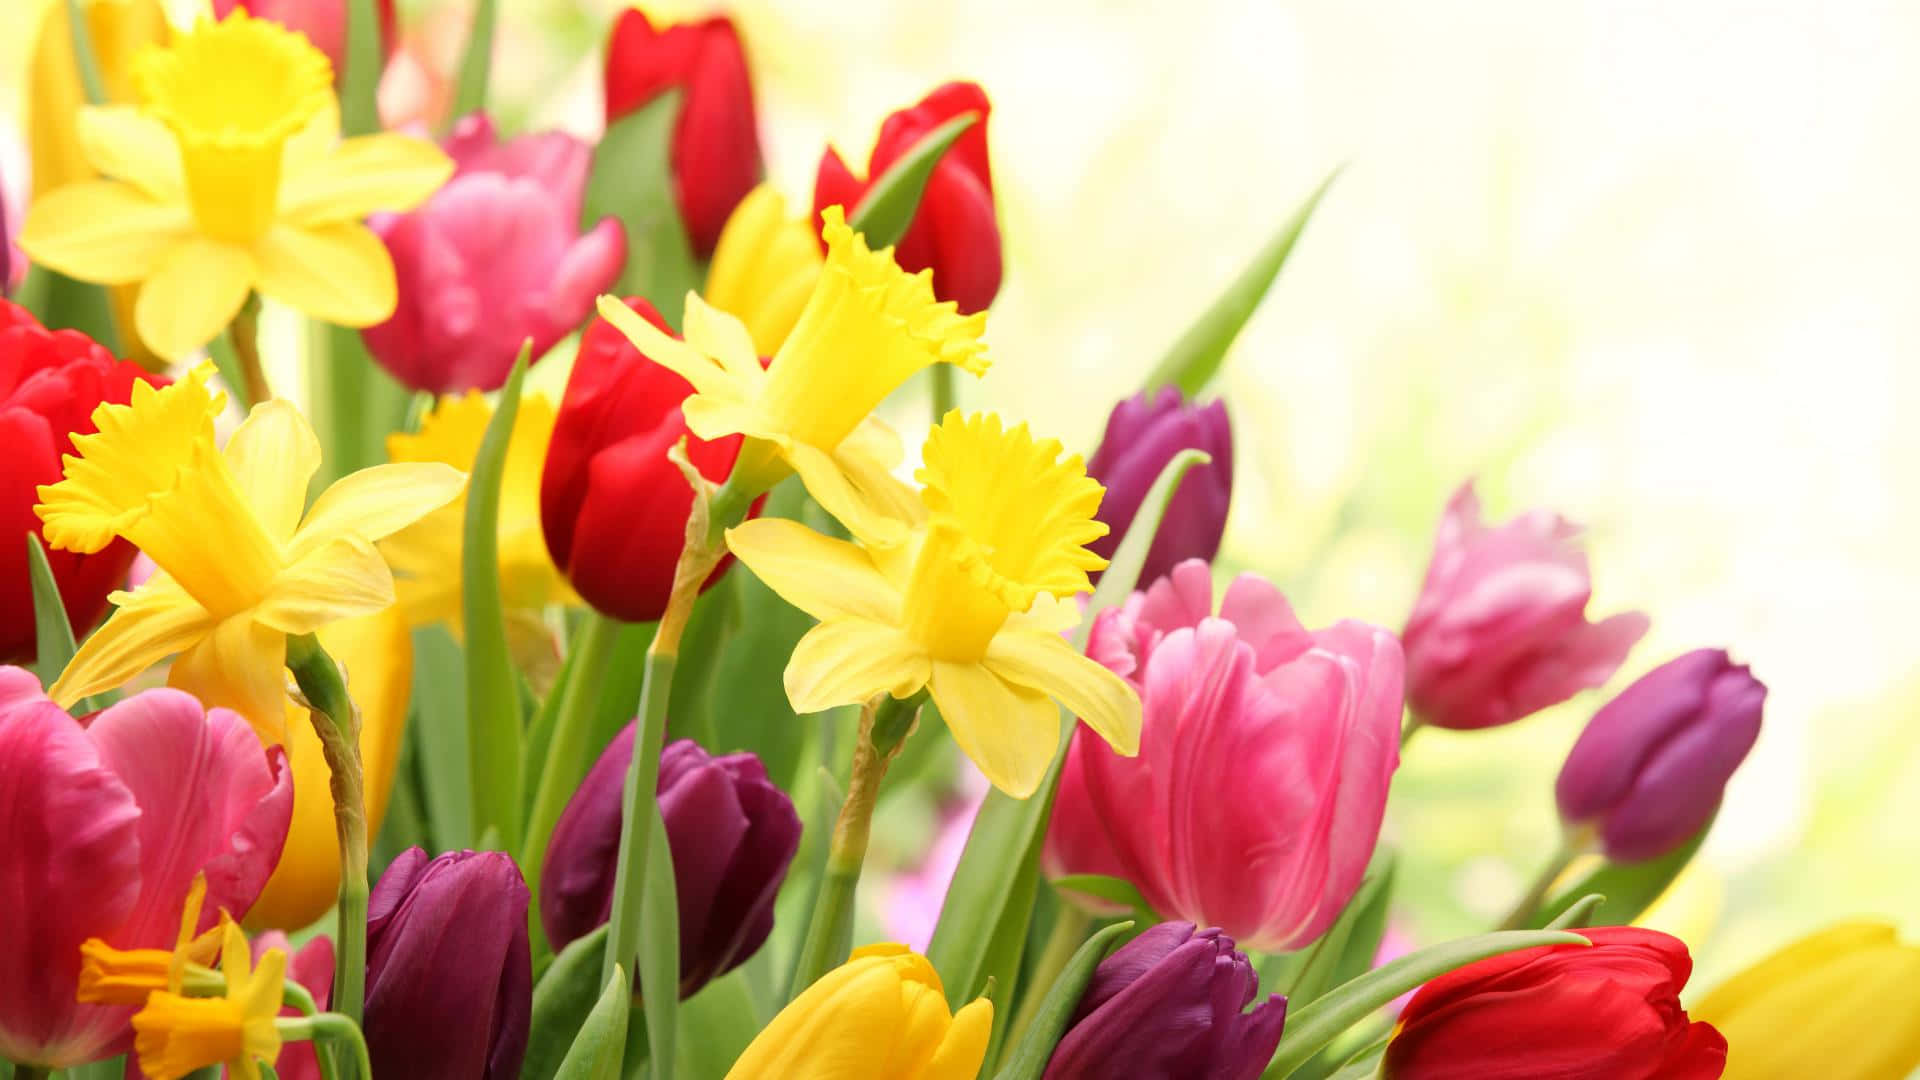 "An array of vibrant spring flowers" Wallpaper